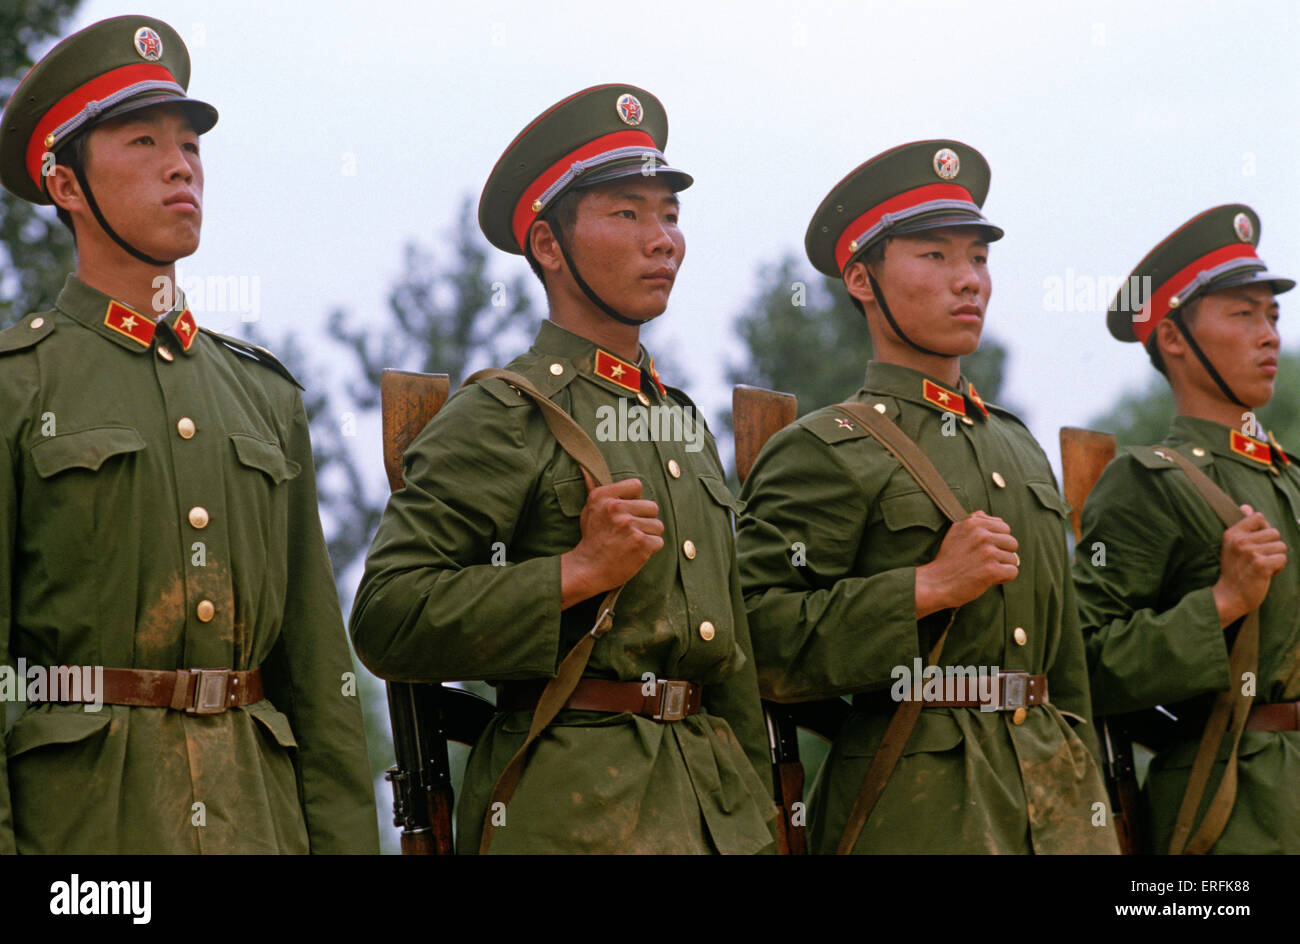 peoples-liberation-army-officers-in-weapons-training-at-shijiazhuang-ERFK88.jpg